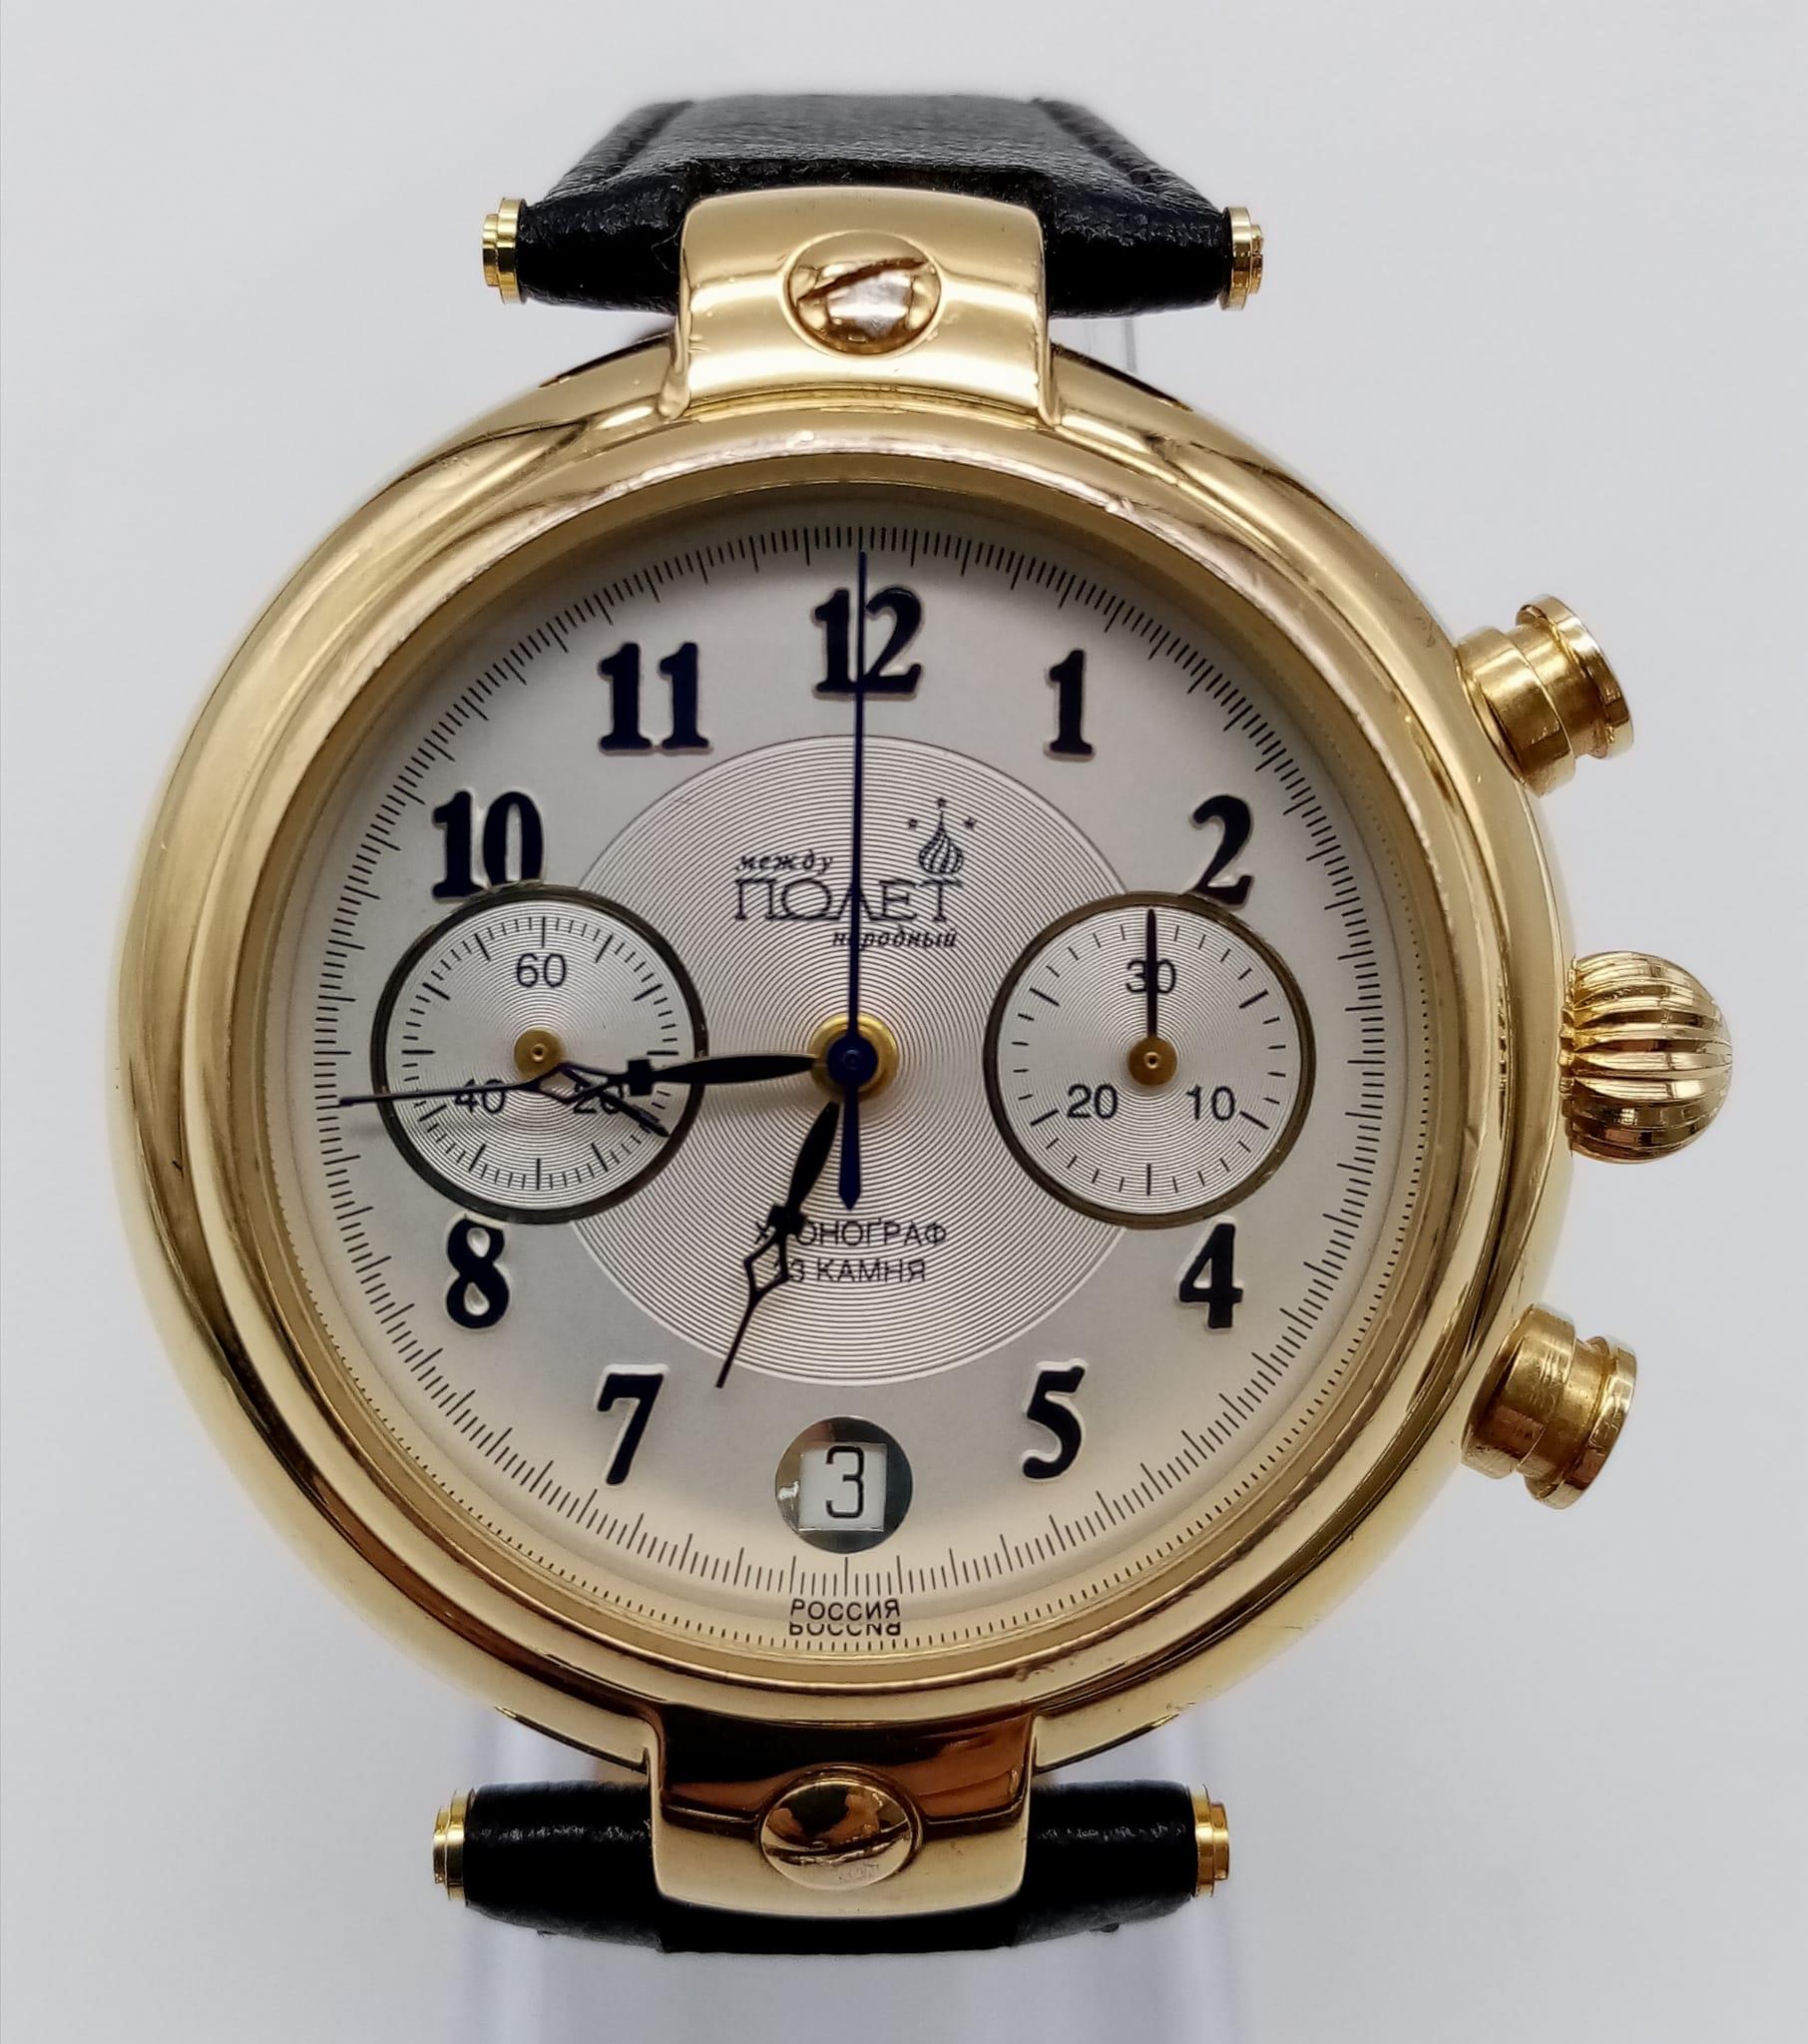 An Excellent Condition, Russian, Men’s Poljot Automatic Chronograph Gold Tone Date Watch. 45mm